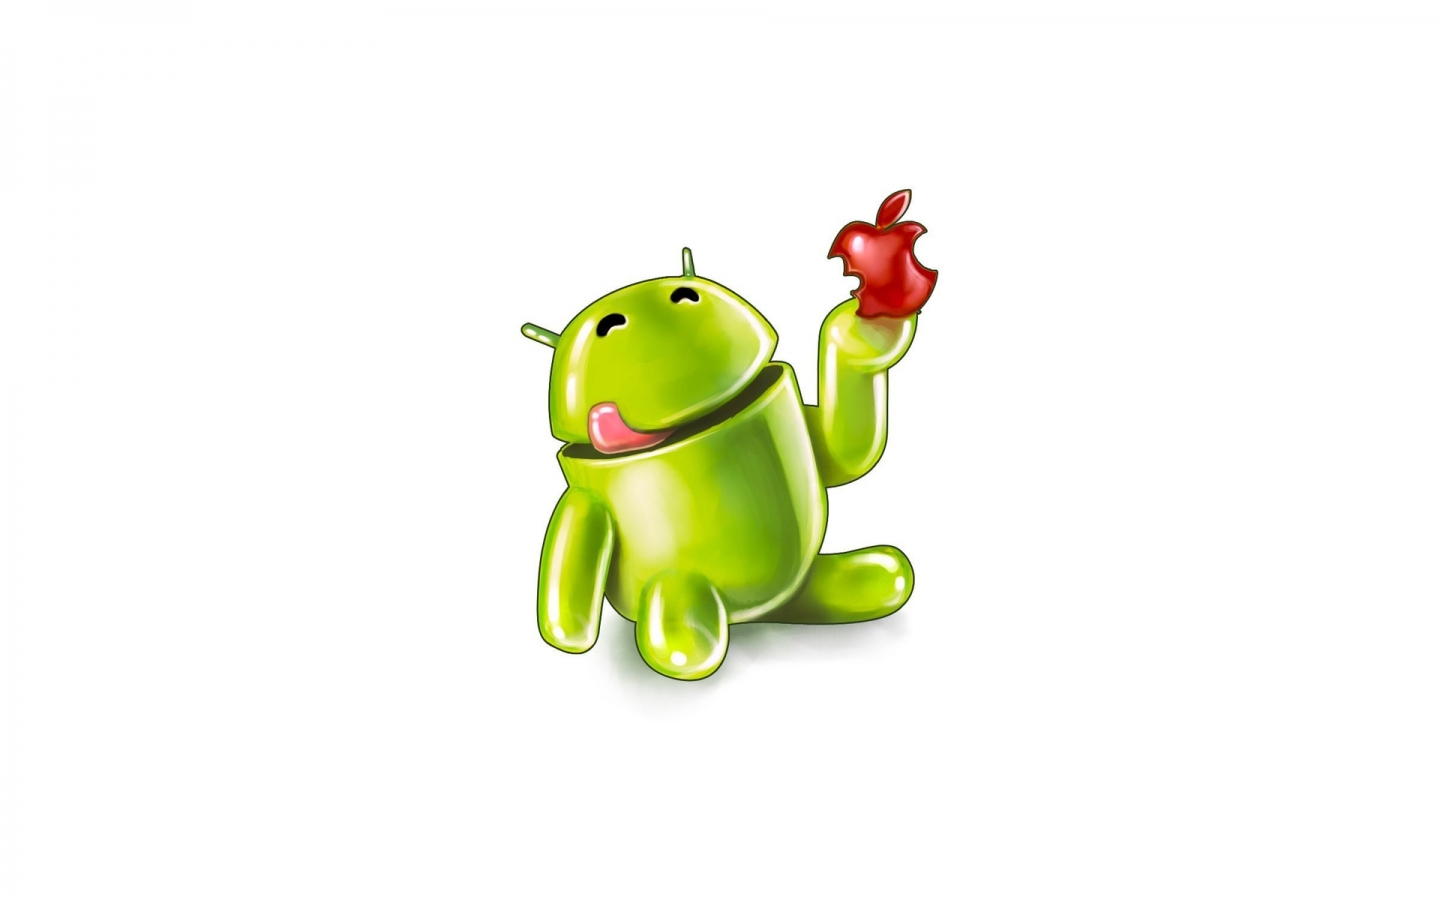 Android Eating Apple for 1440 x 900 widescreen resolution